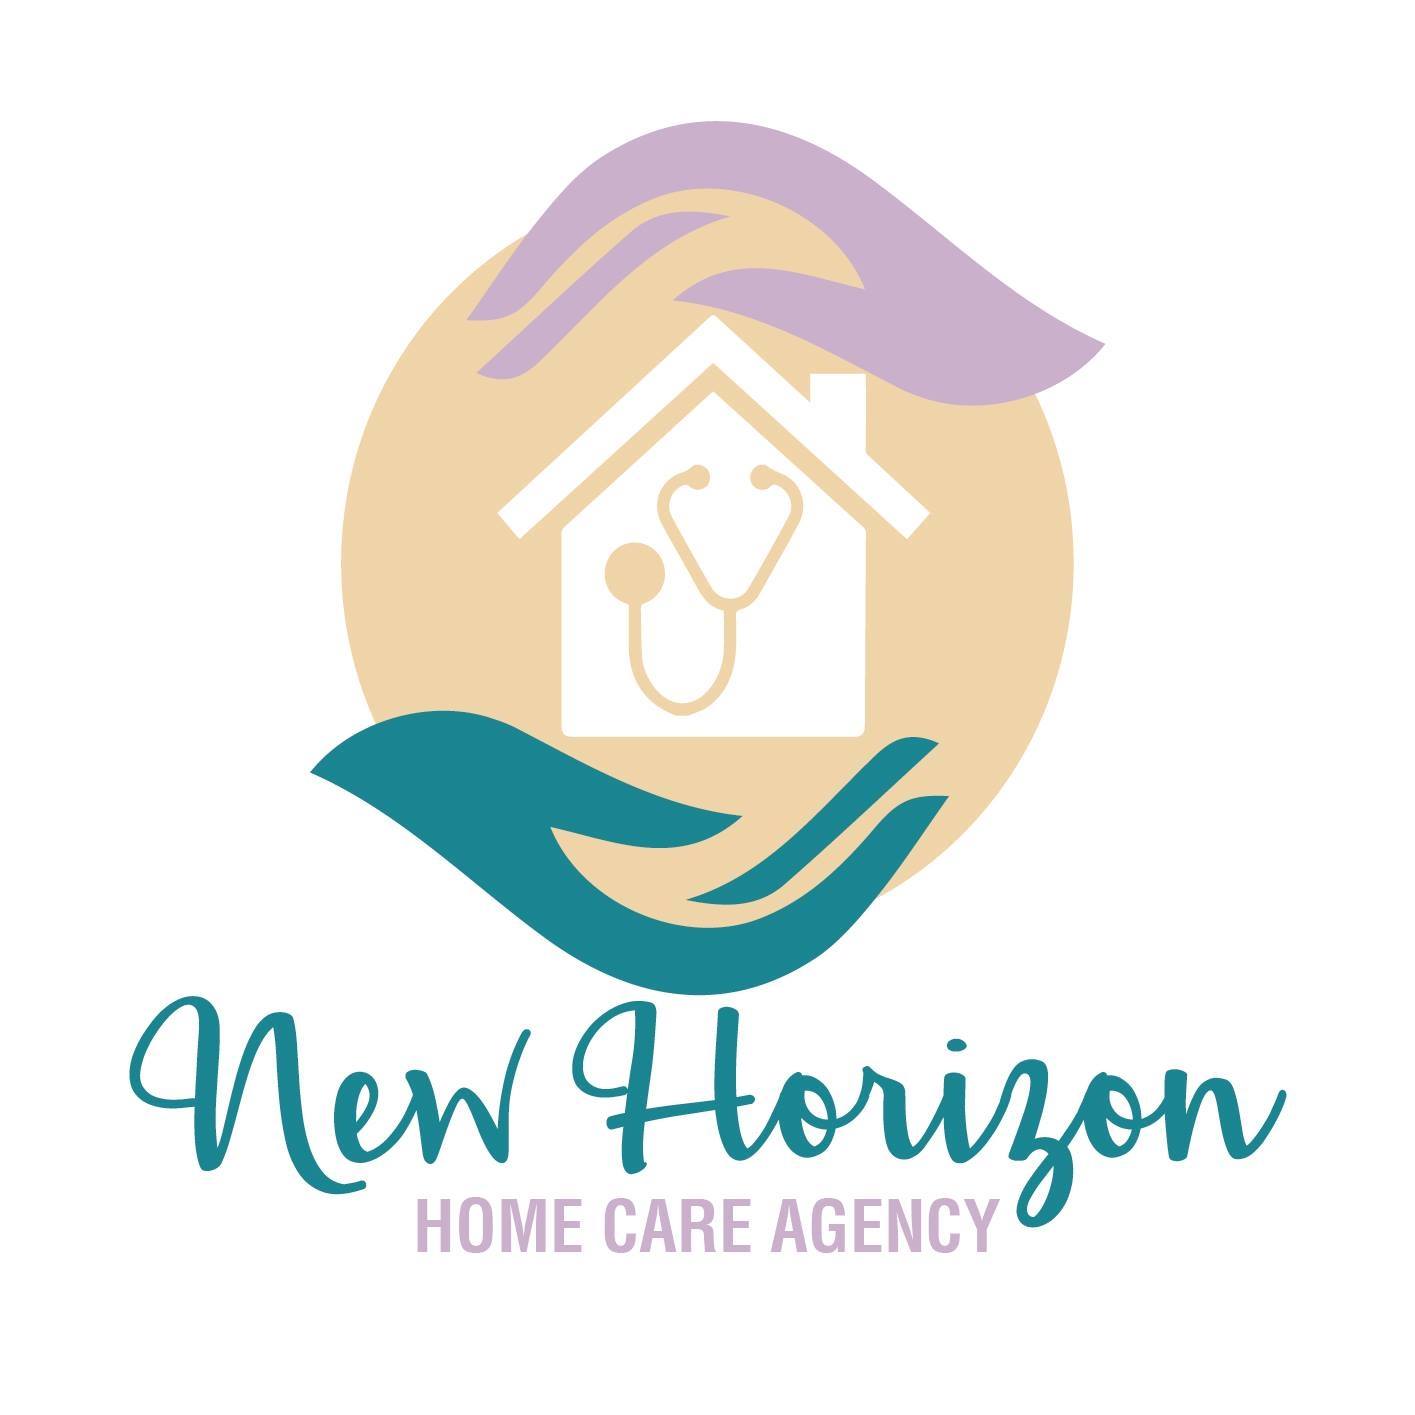 New Horizon Home Care Agency - Belize, Central America